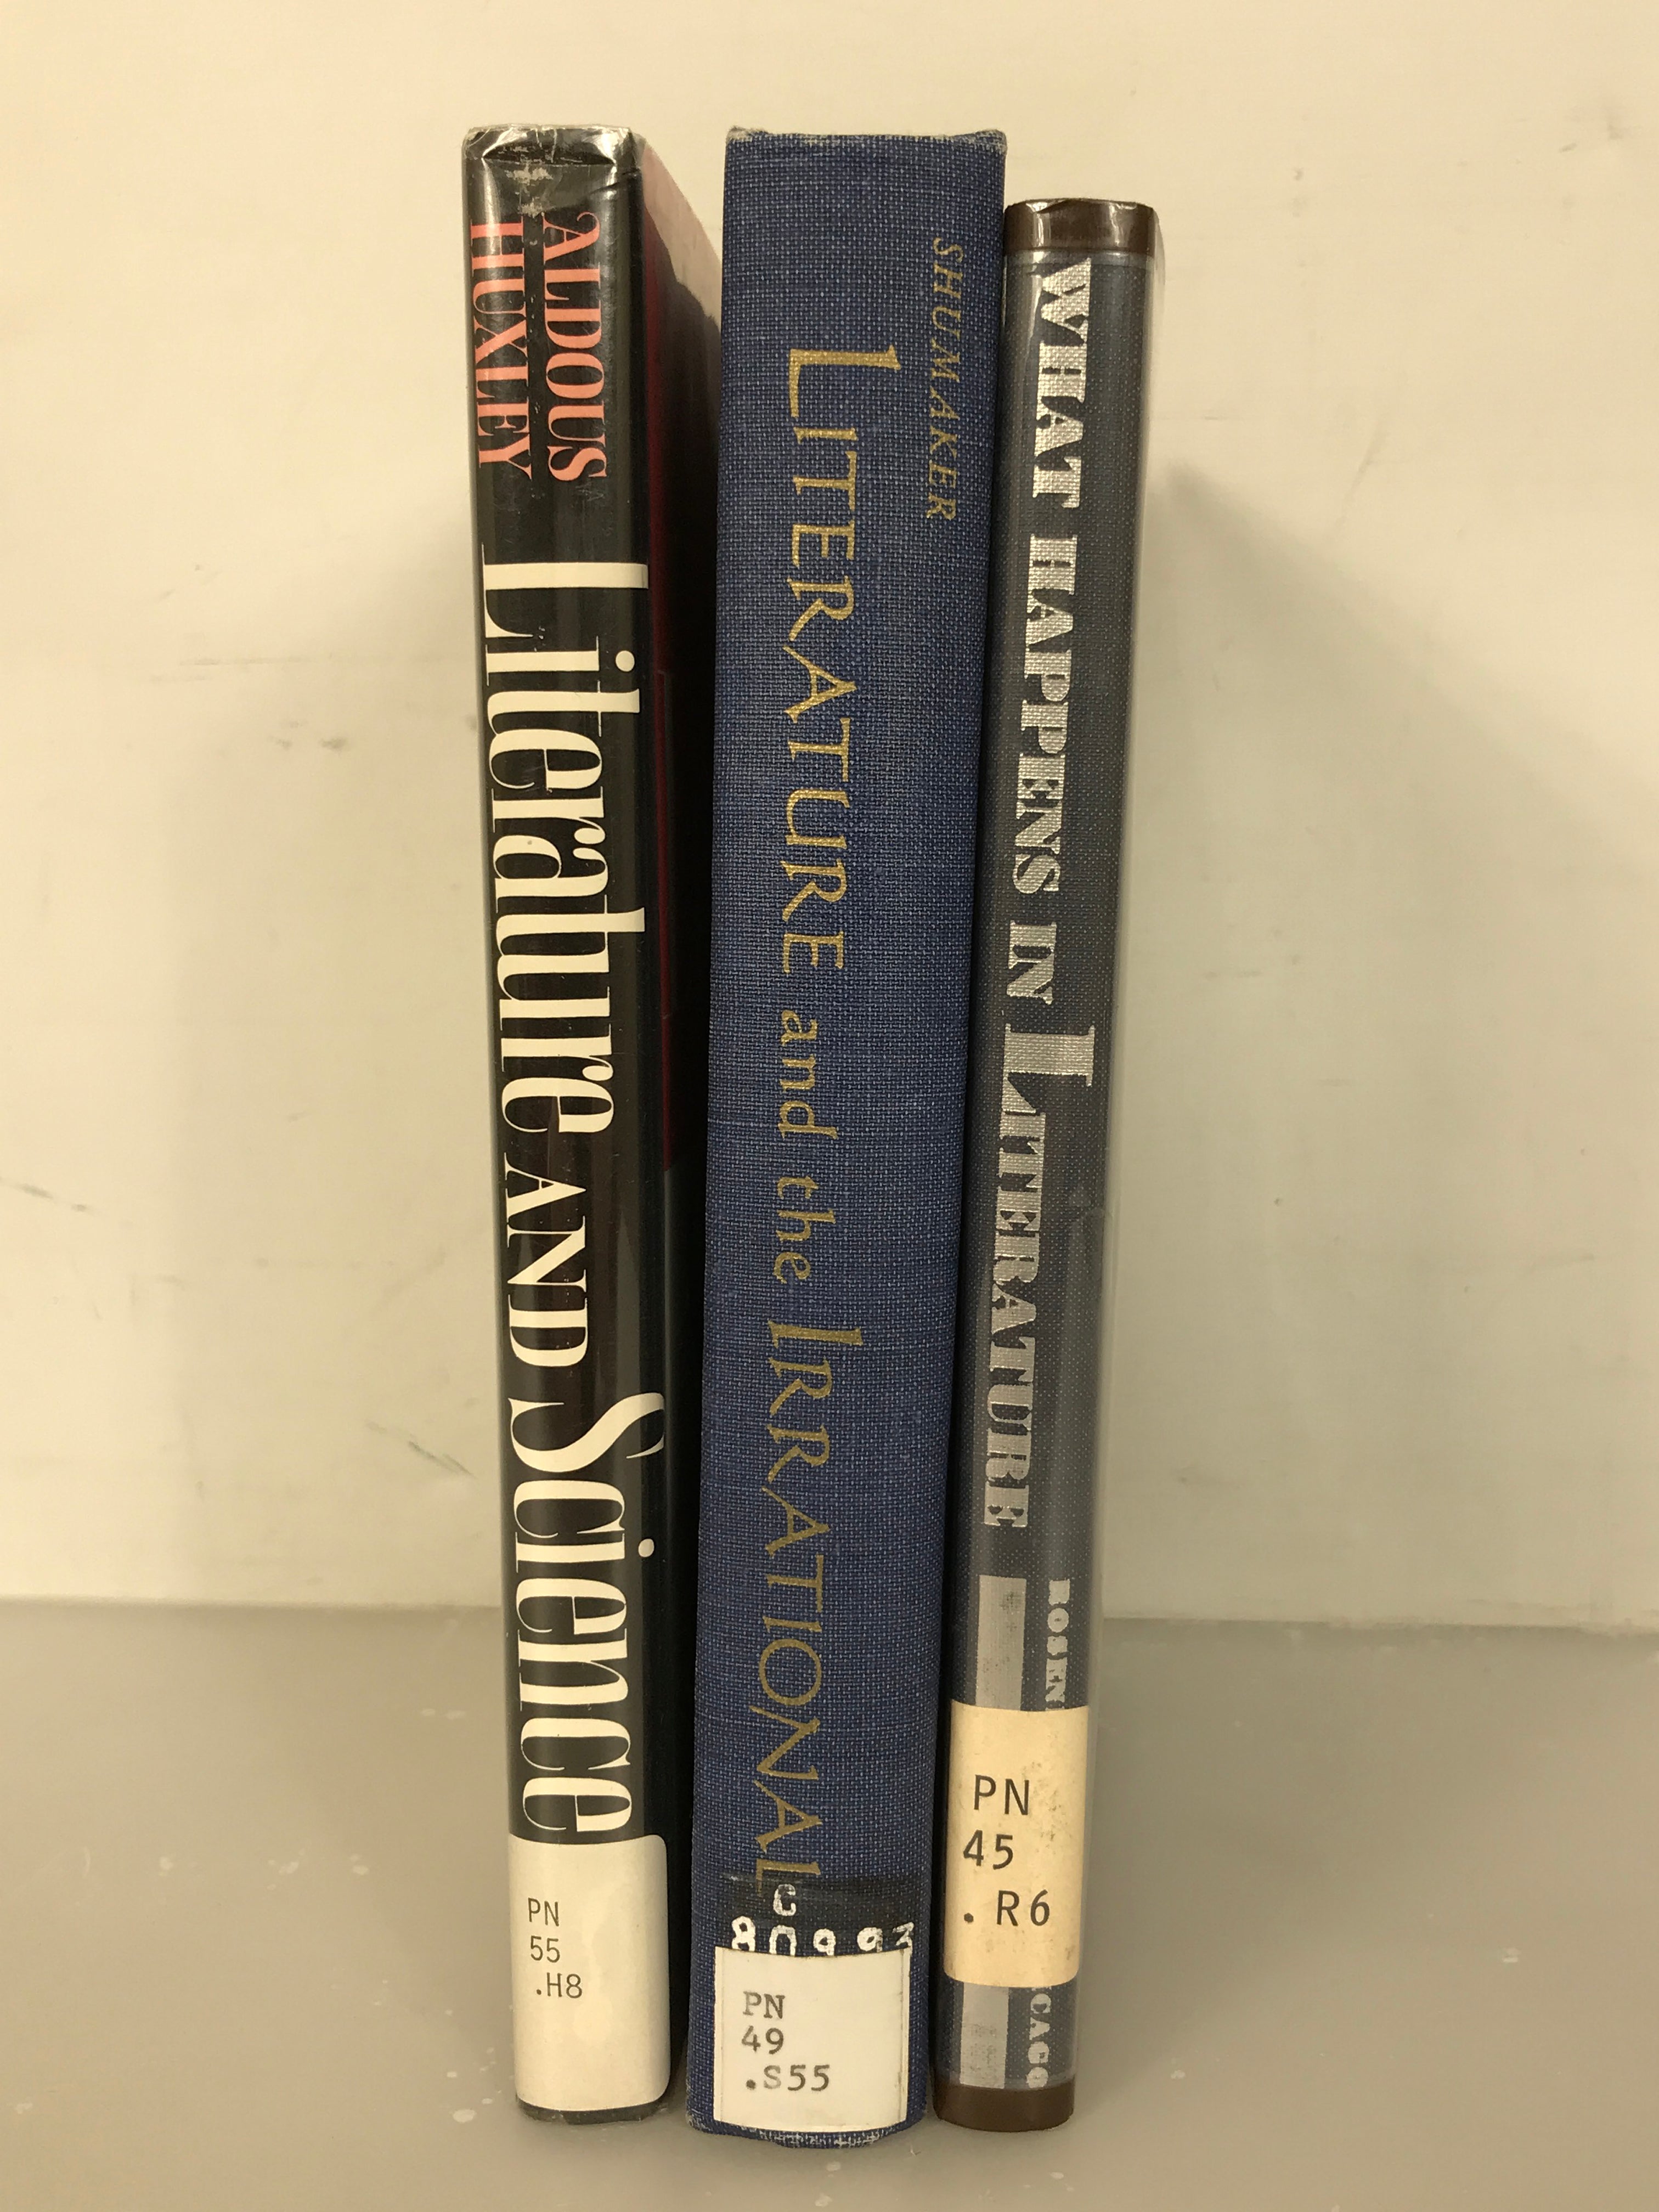 Lot of 3 Literary Studies Books: Literature and the Irrational (1960), Literature and Science (1963 First Edition), What Happens in Literature (1969) HC DJ